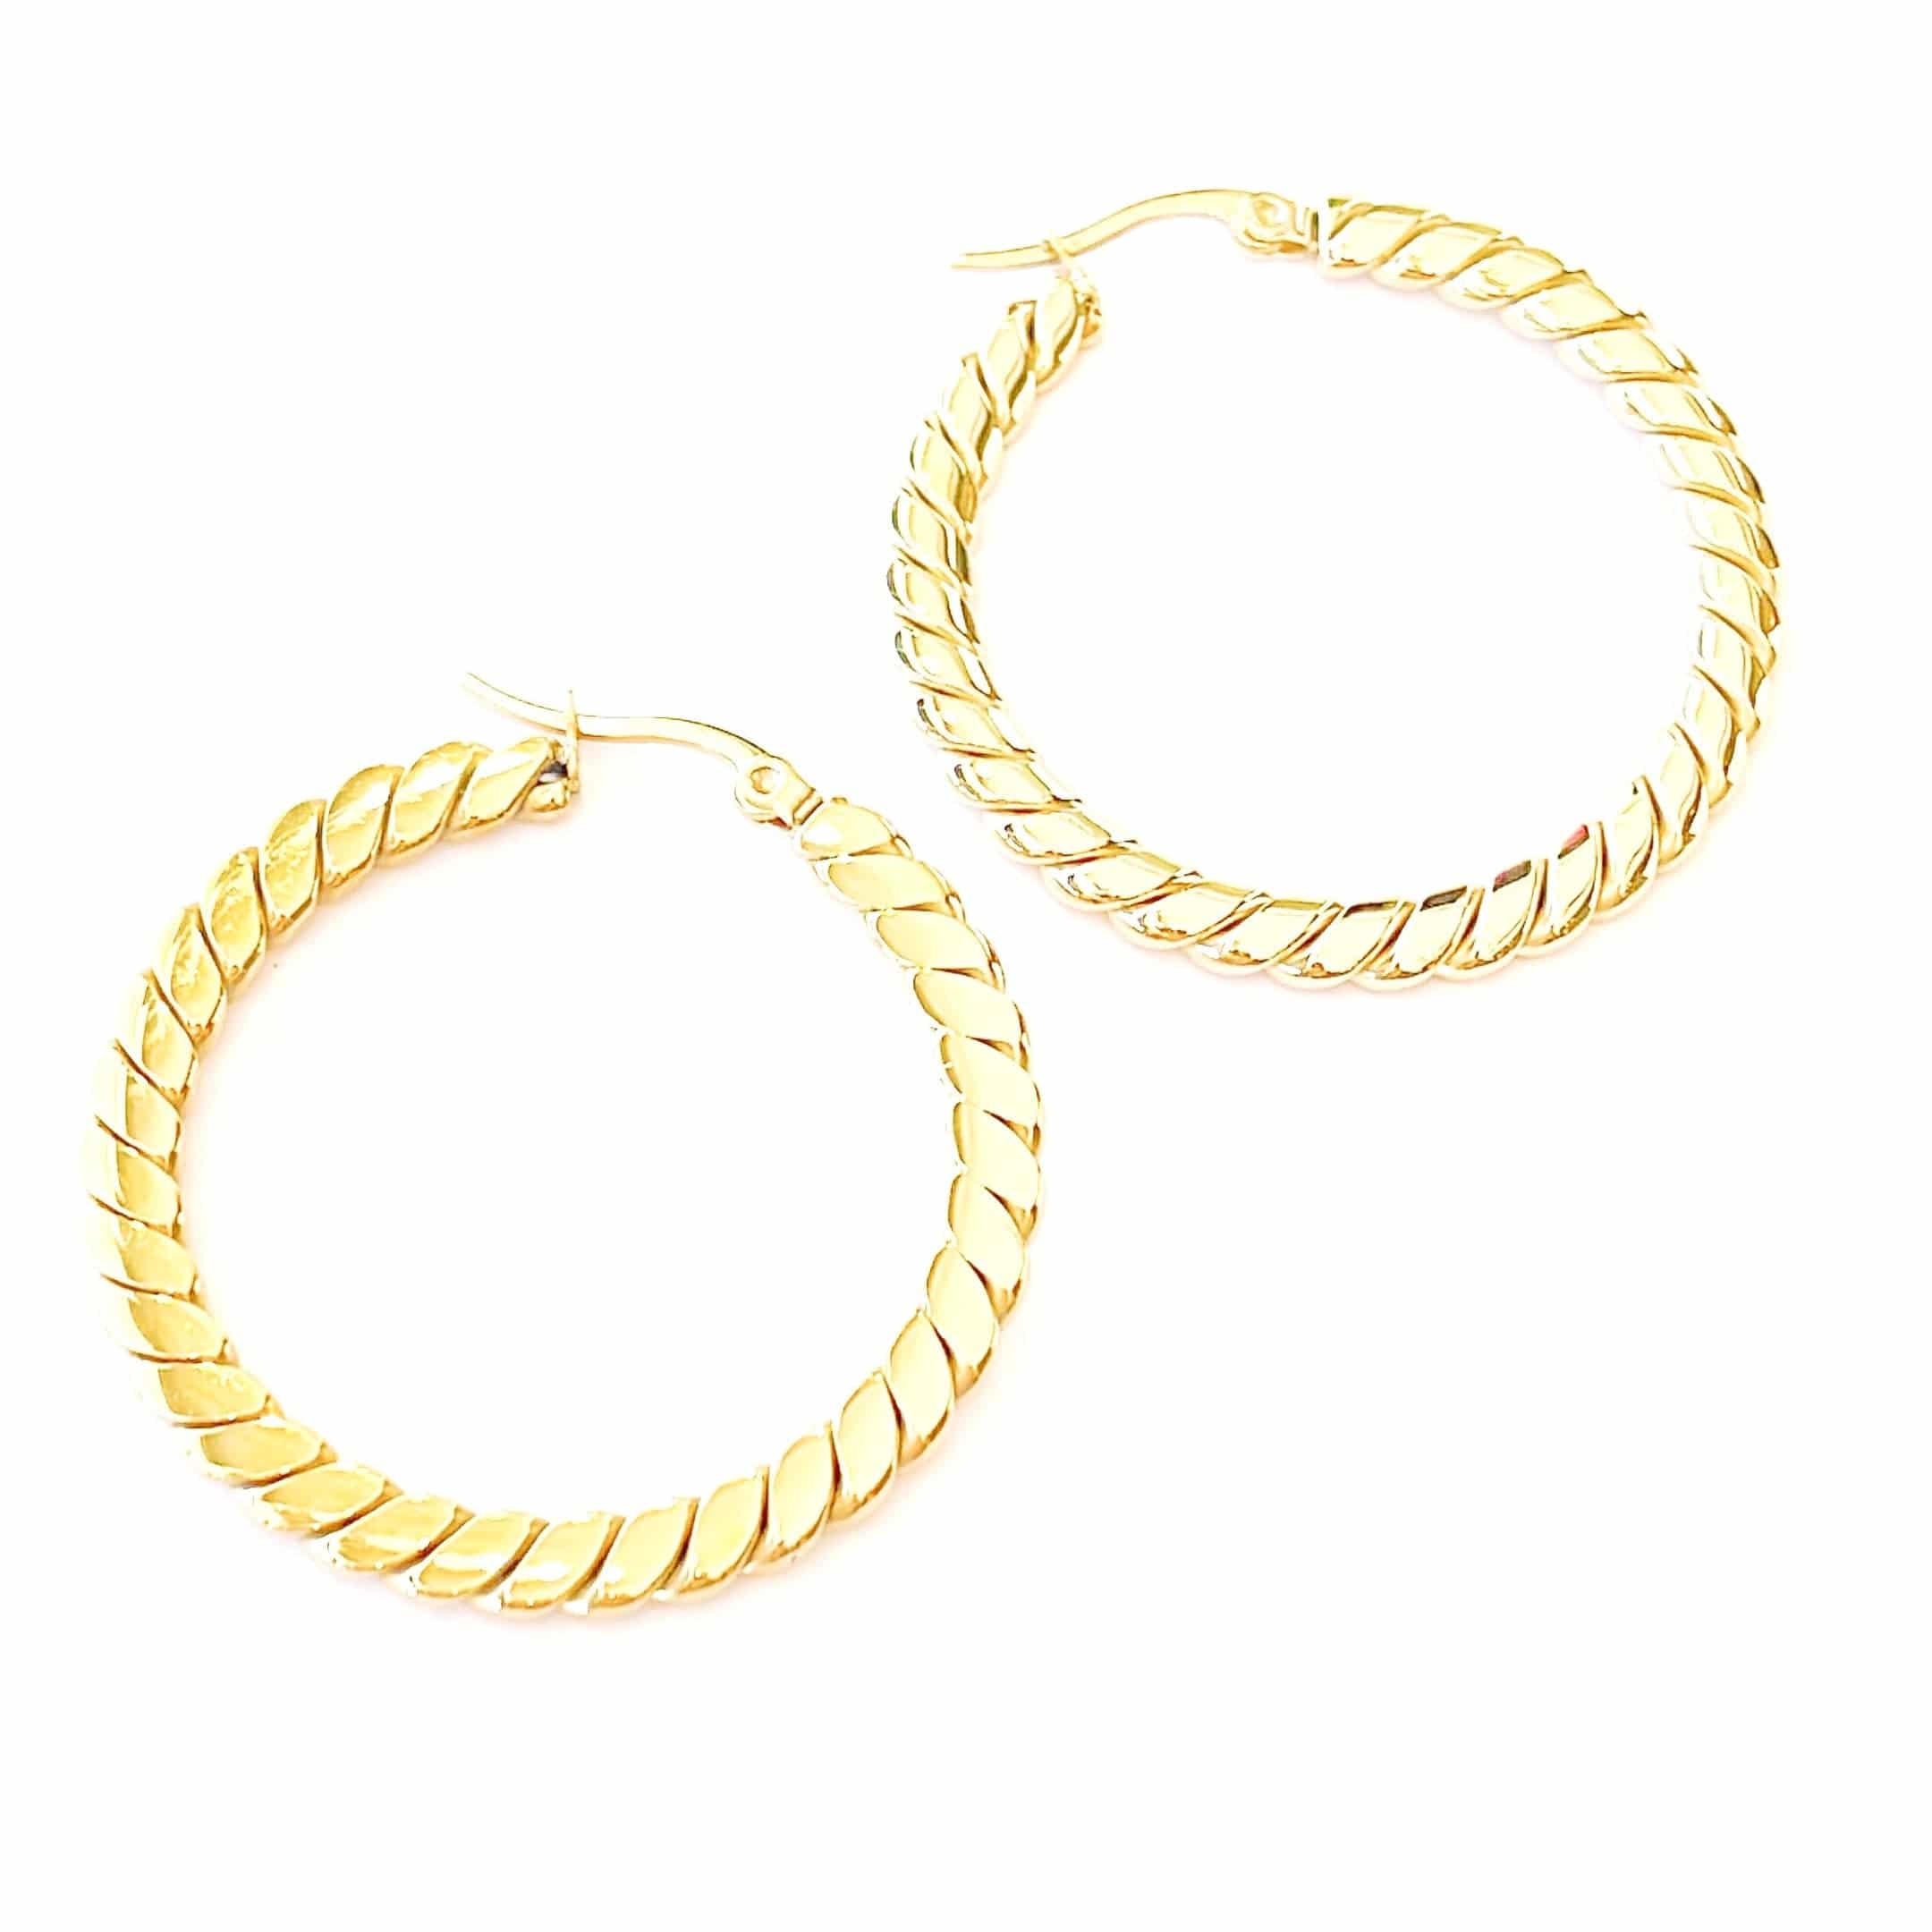 Gold Twisted Hoop Earrings - Gottohaveitfashion